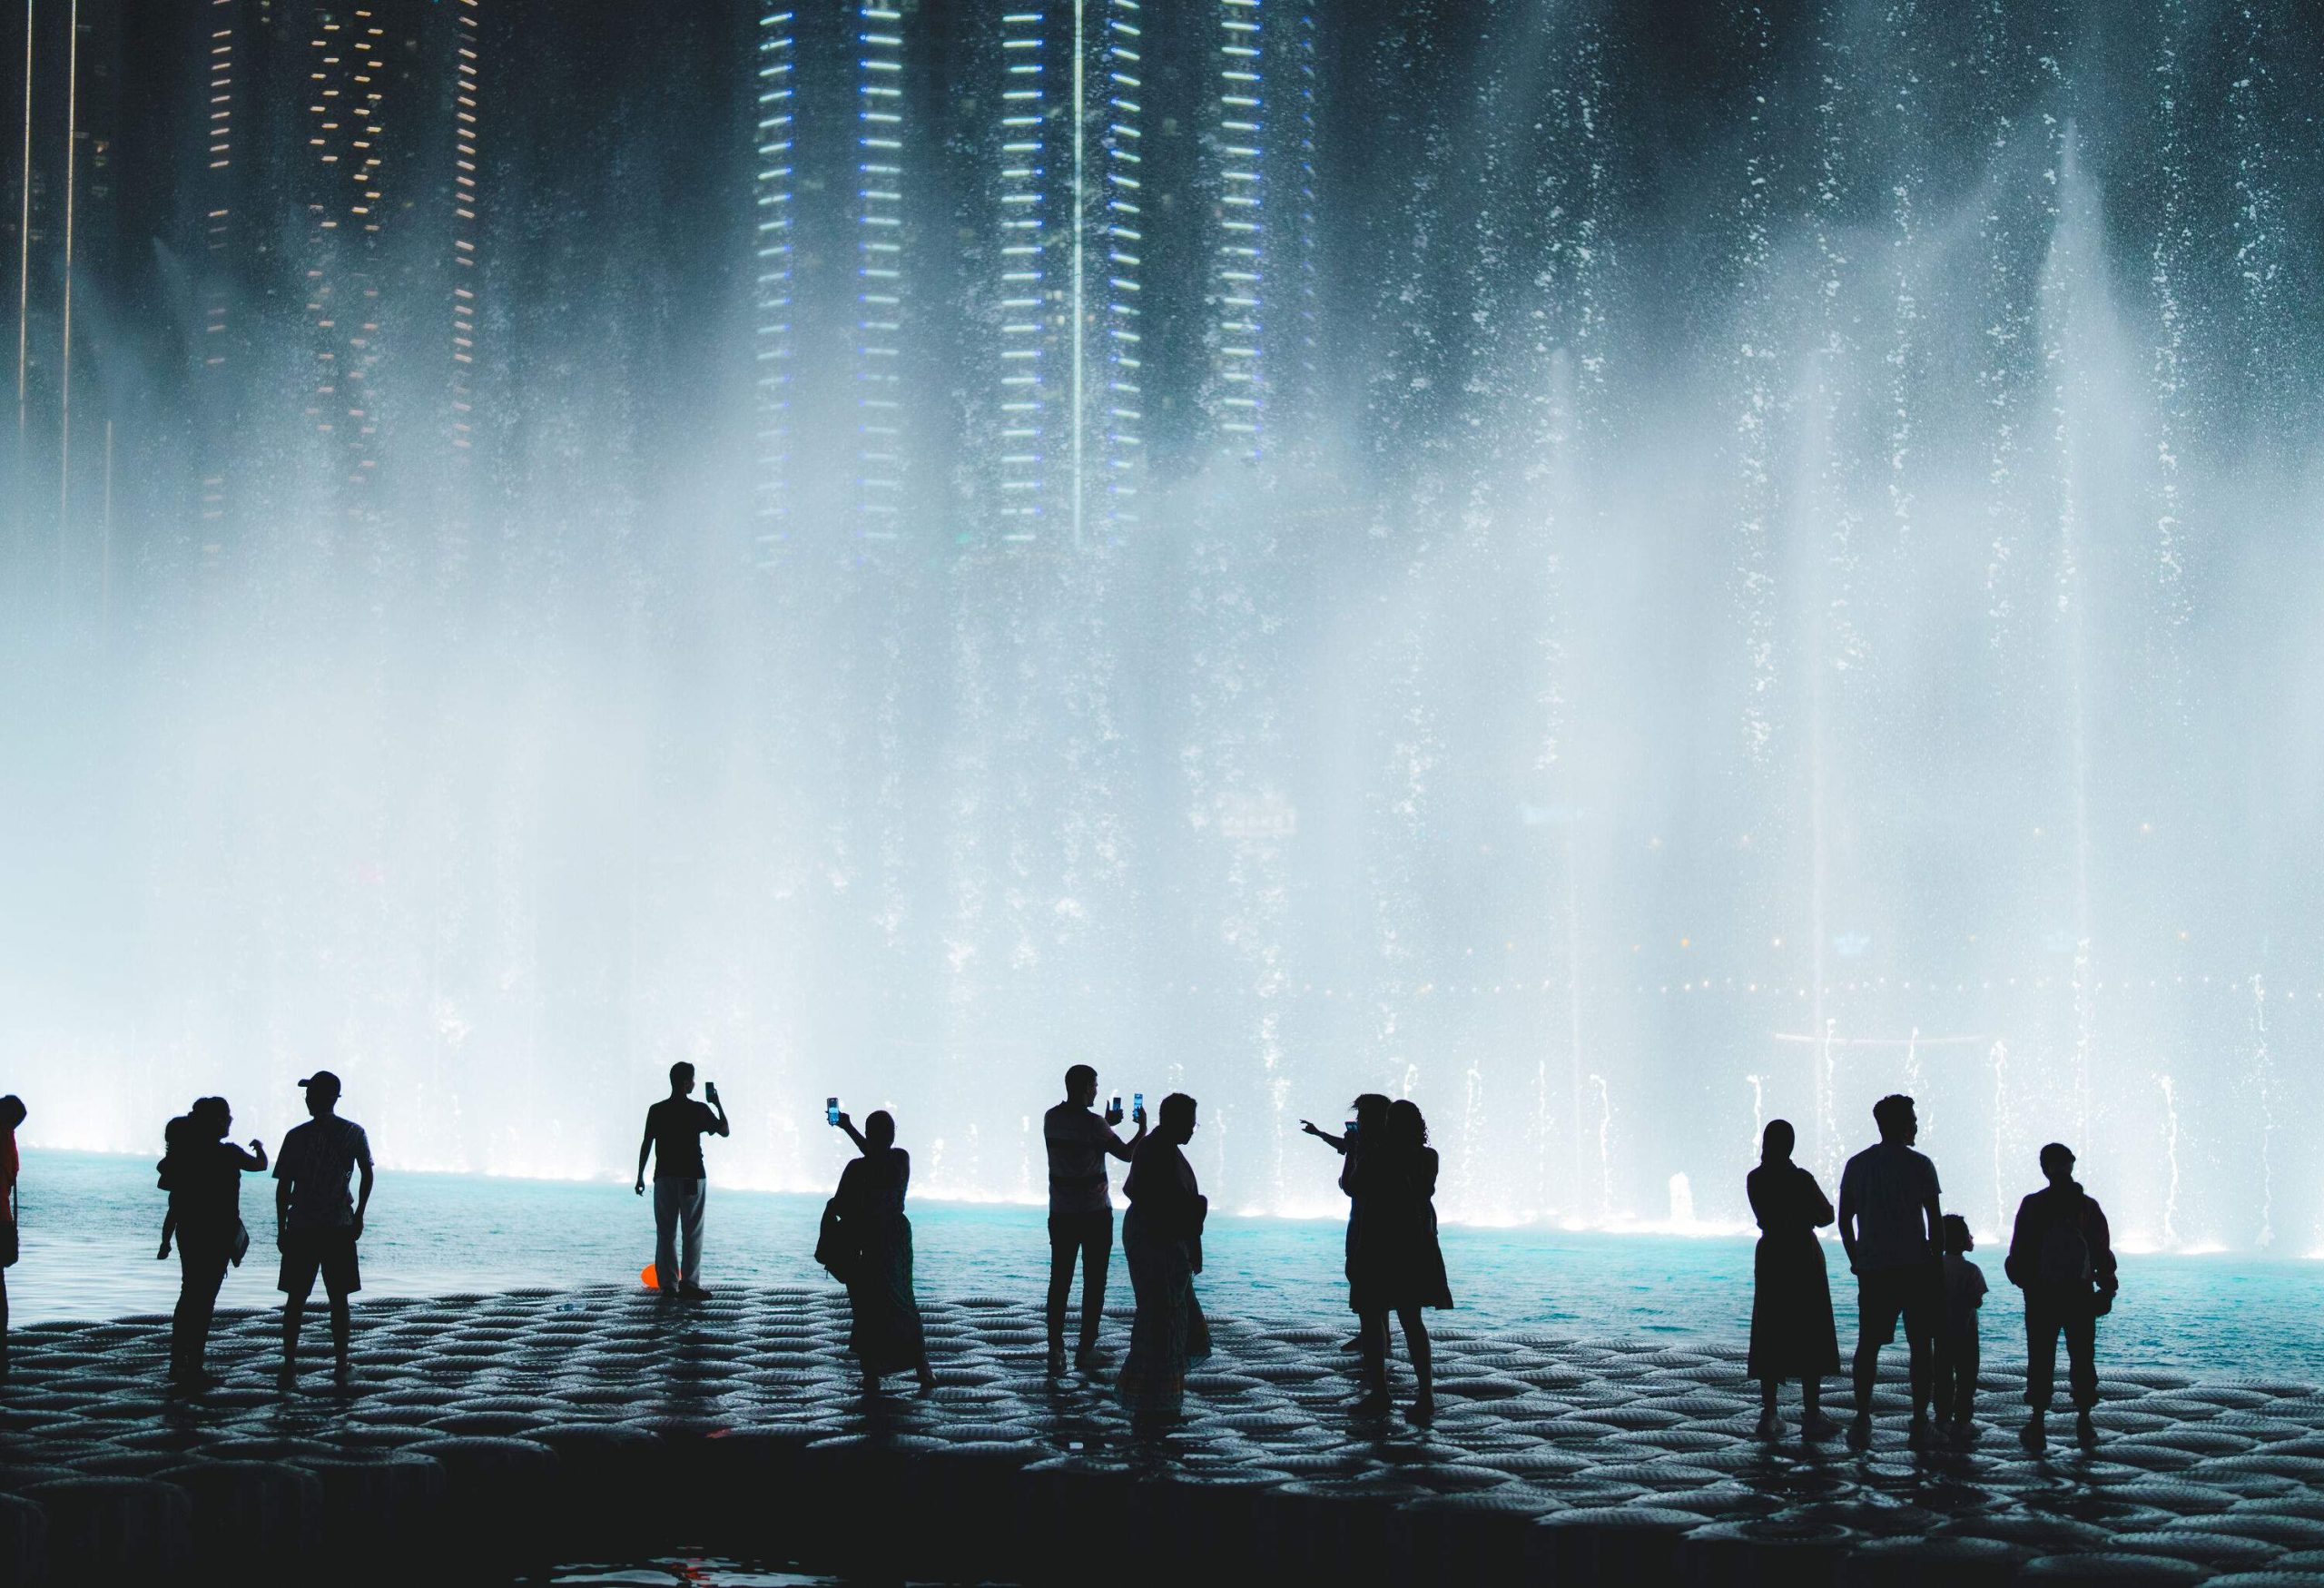 A captivating silhouette of people, their gazes fixed upon the mesmerising fountain performance under the night sky.